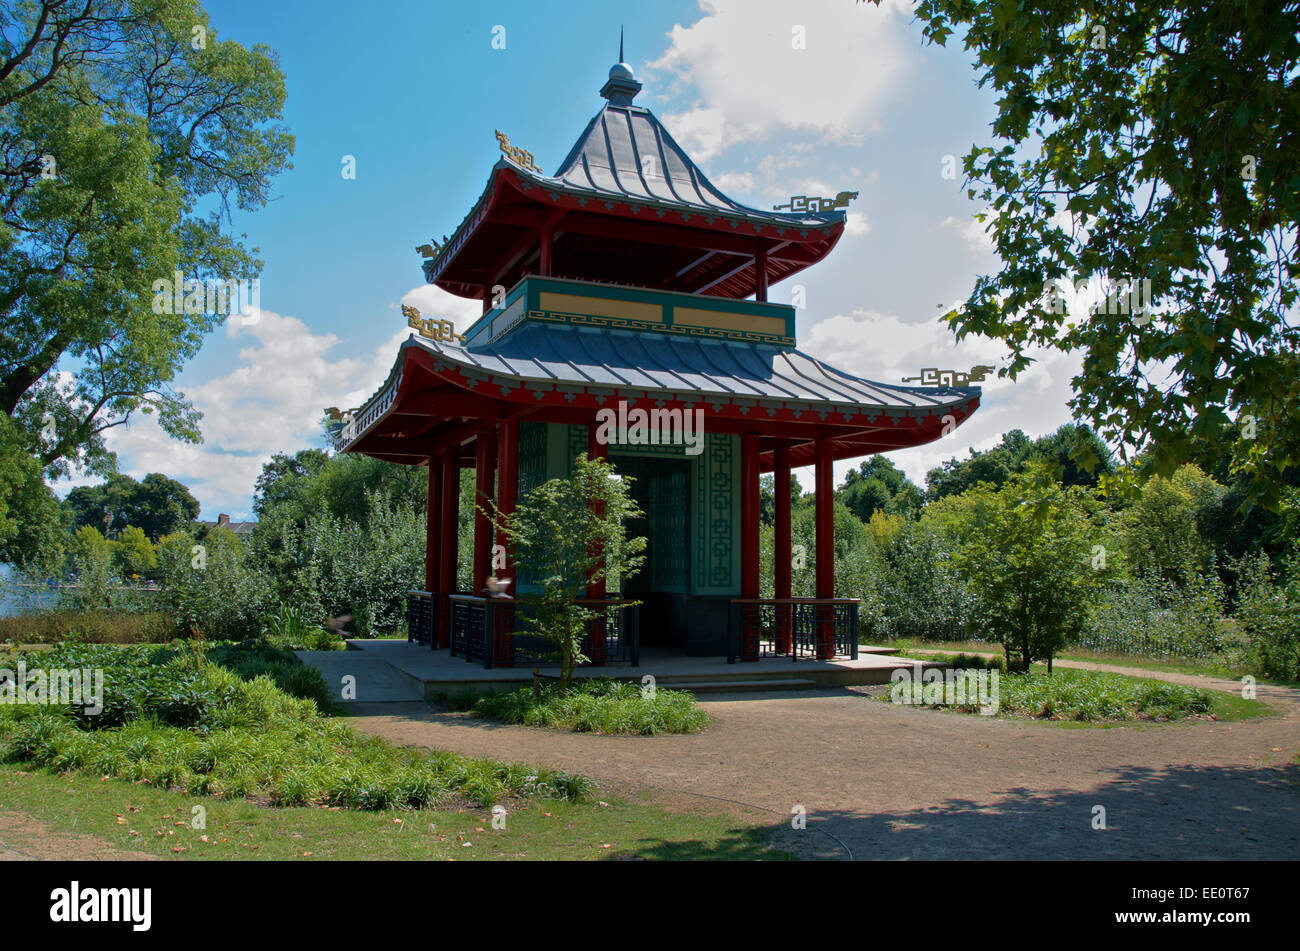 Chinese pagoda in Victoria Park, Mile End, London Stock Photo